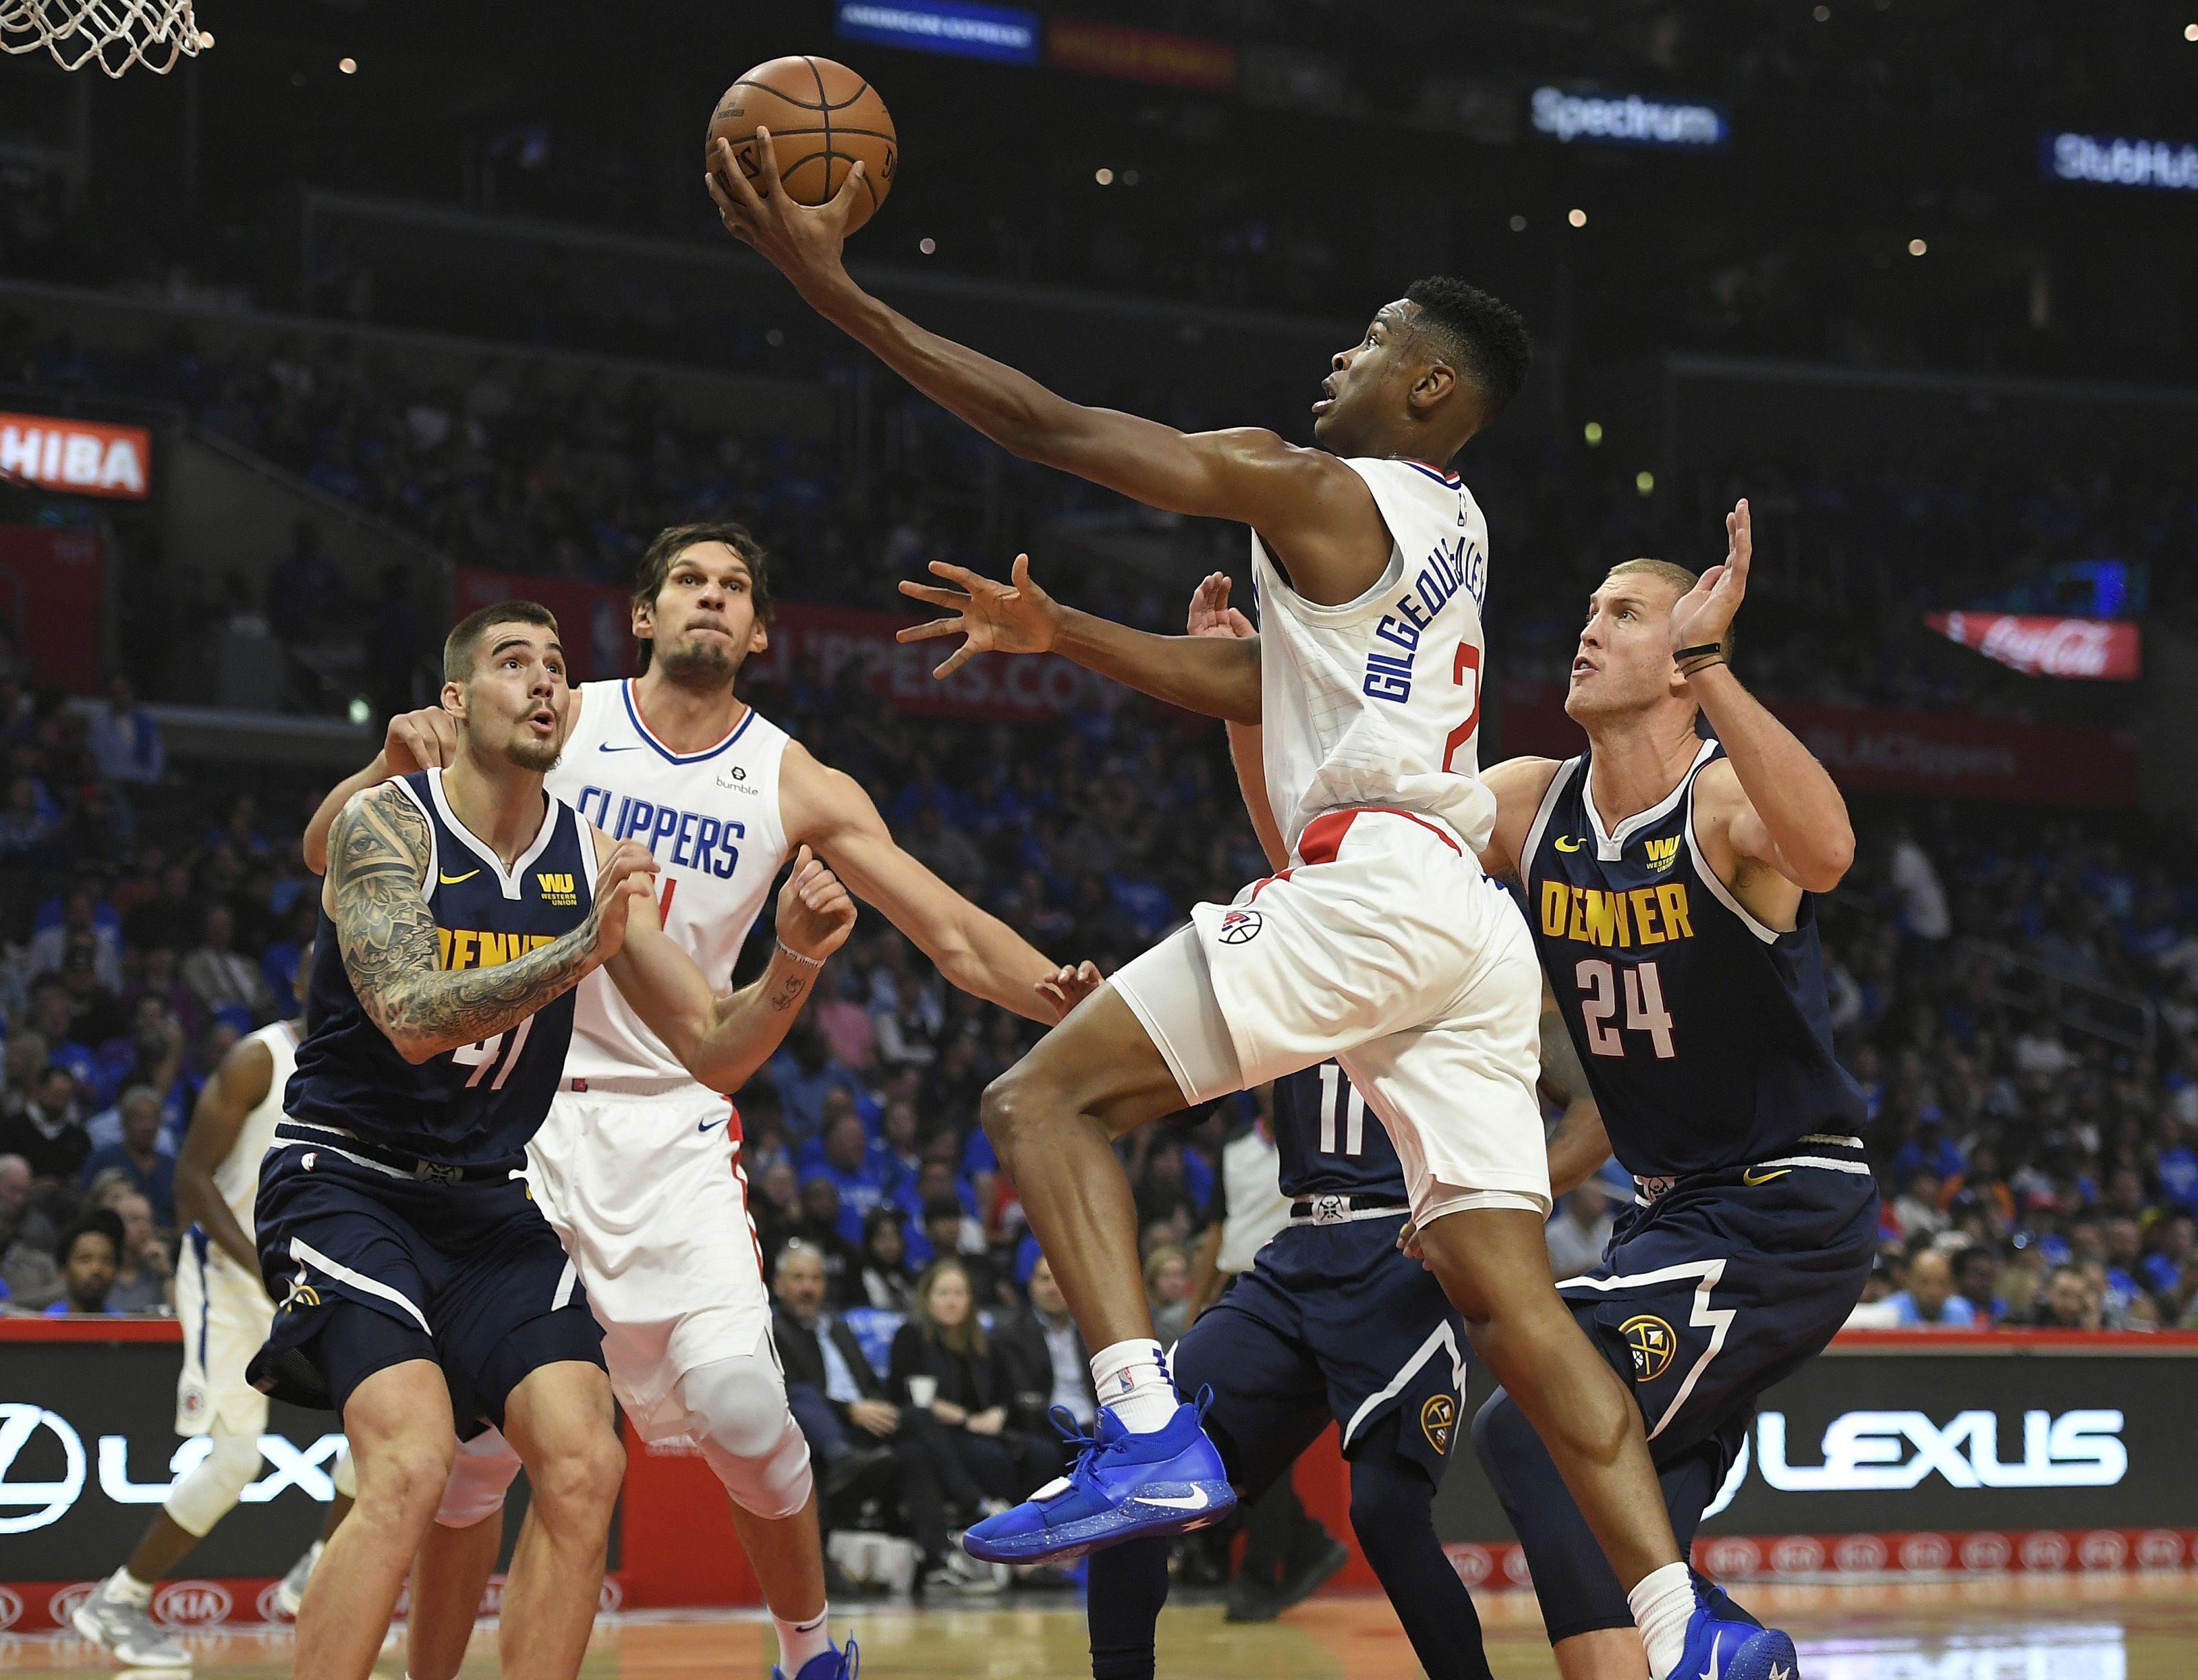 LA Clippers: Shai Gilgeous Alexander Shines And Other Takeaways